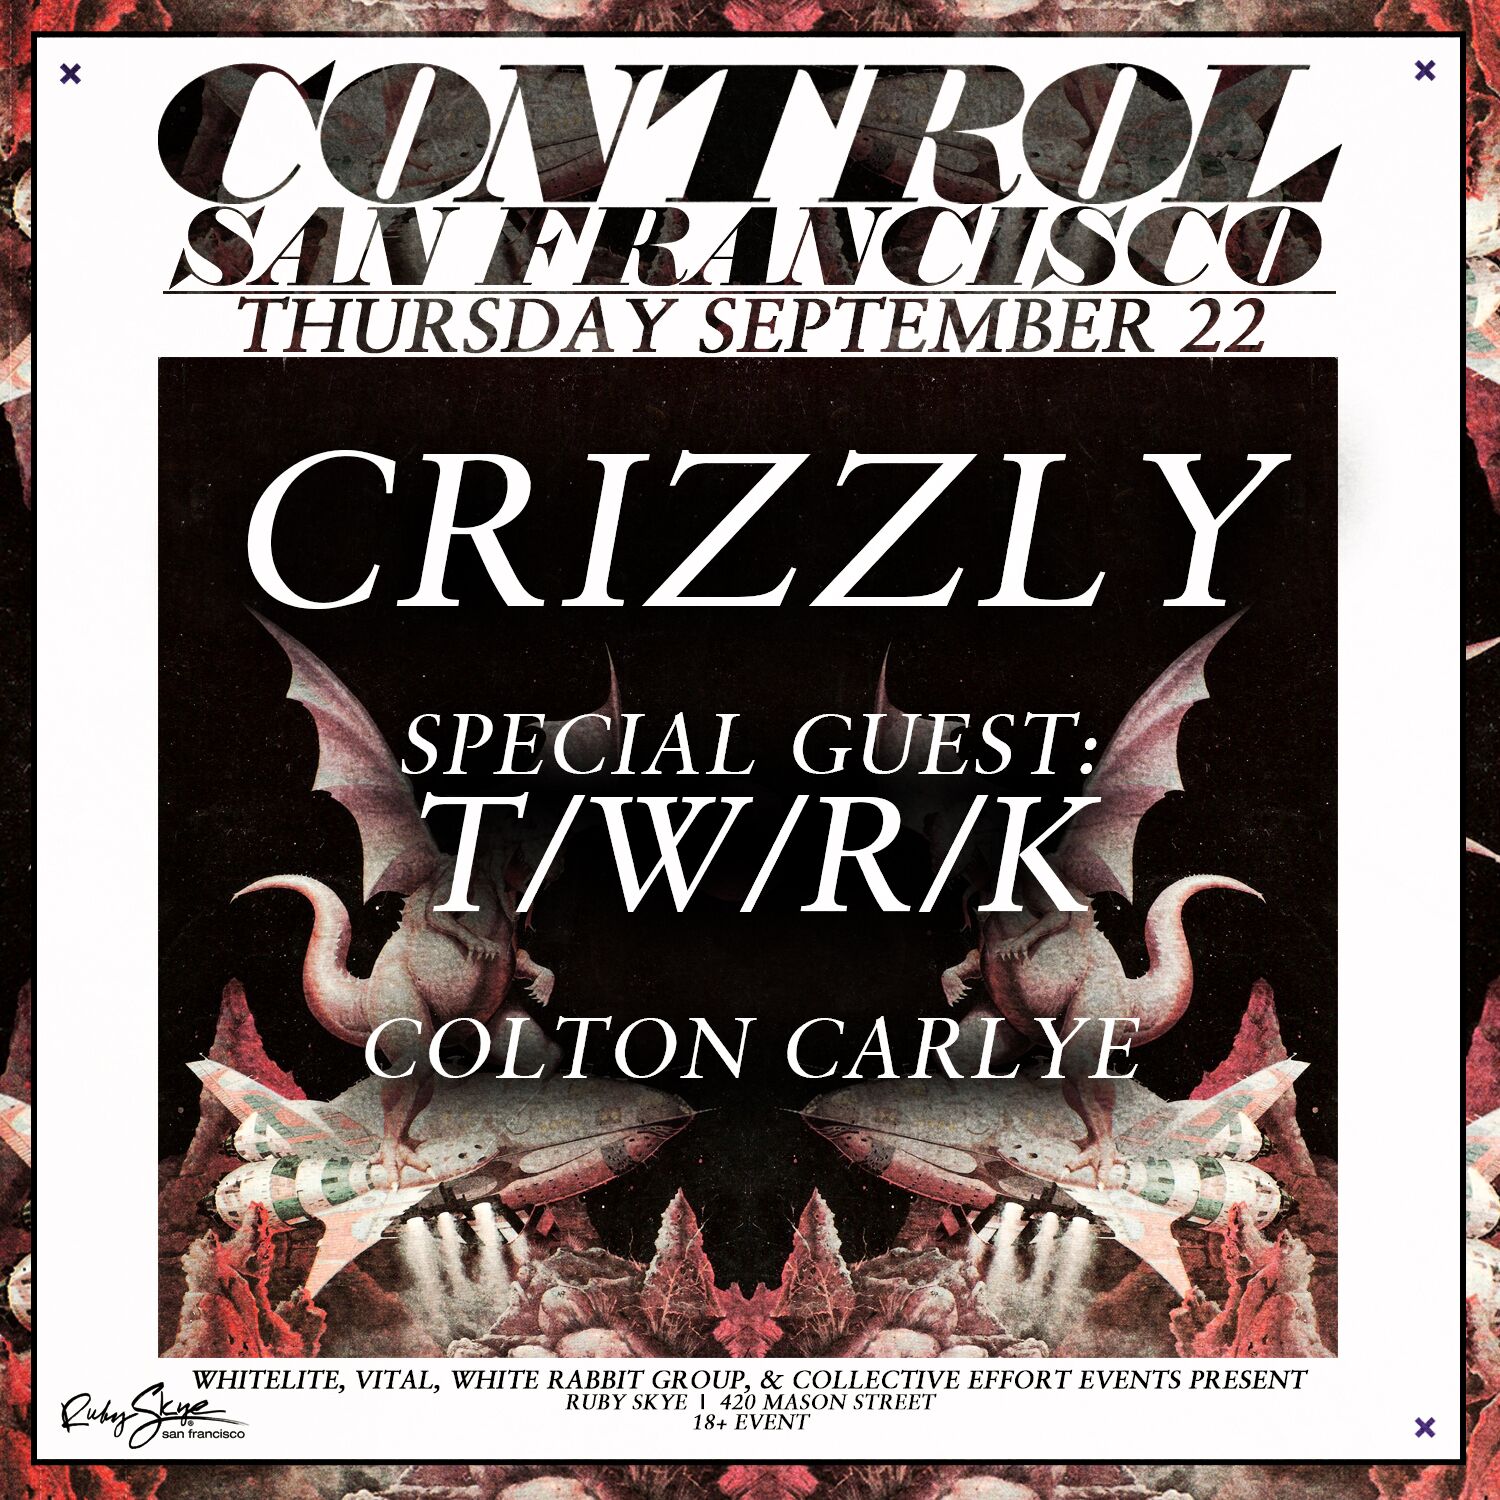 CRIZZLY